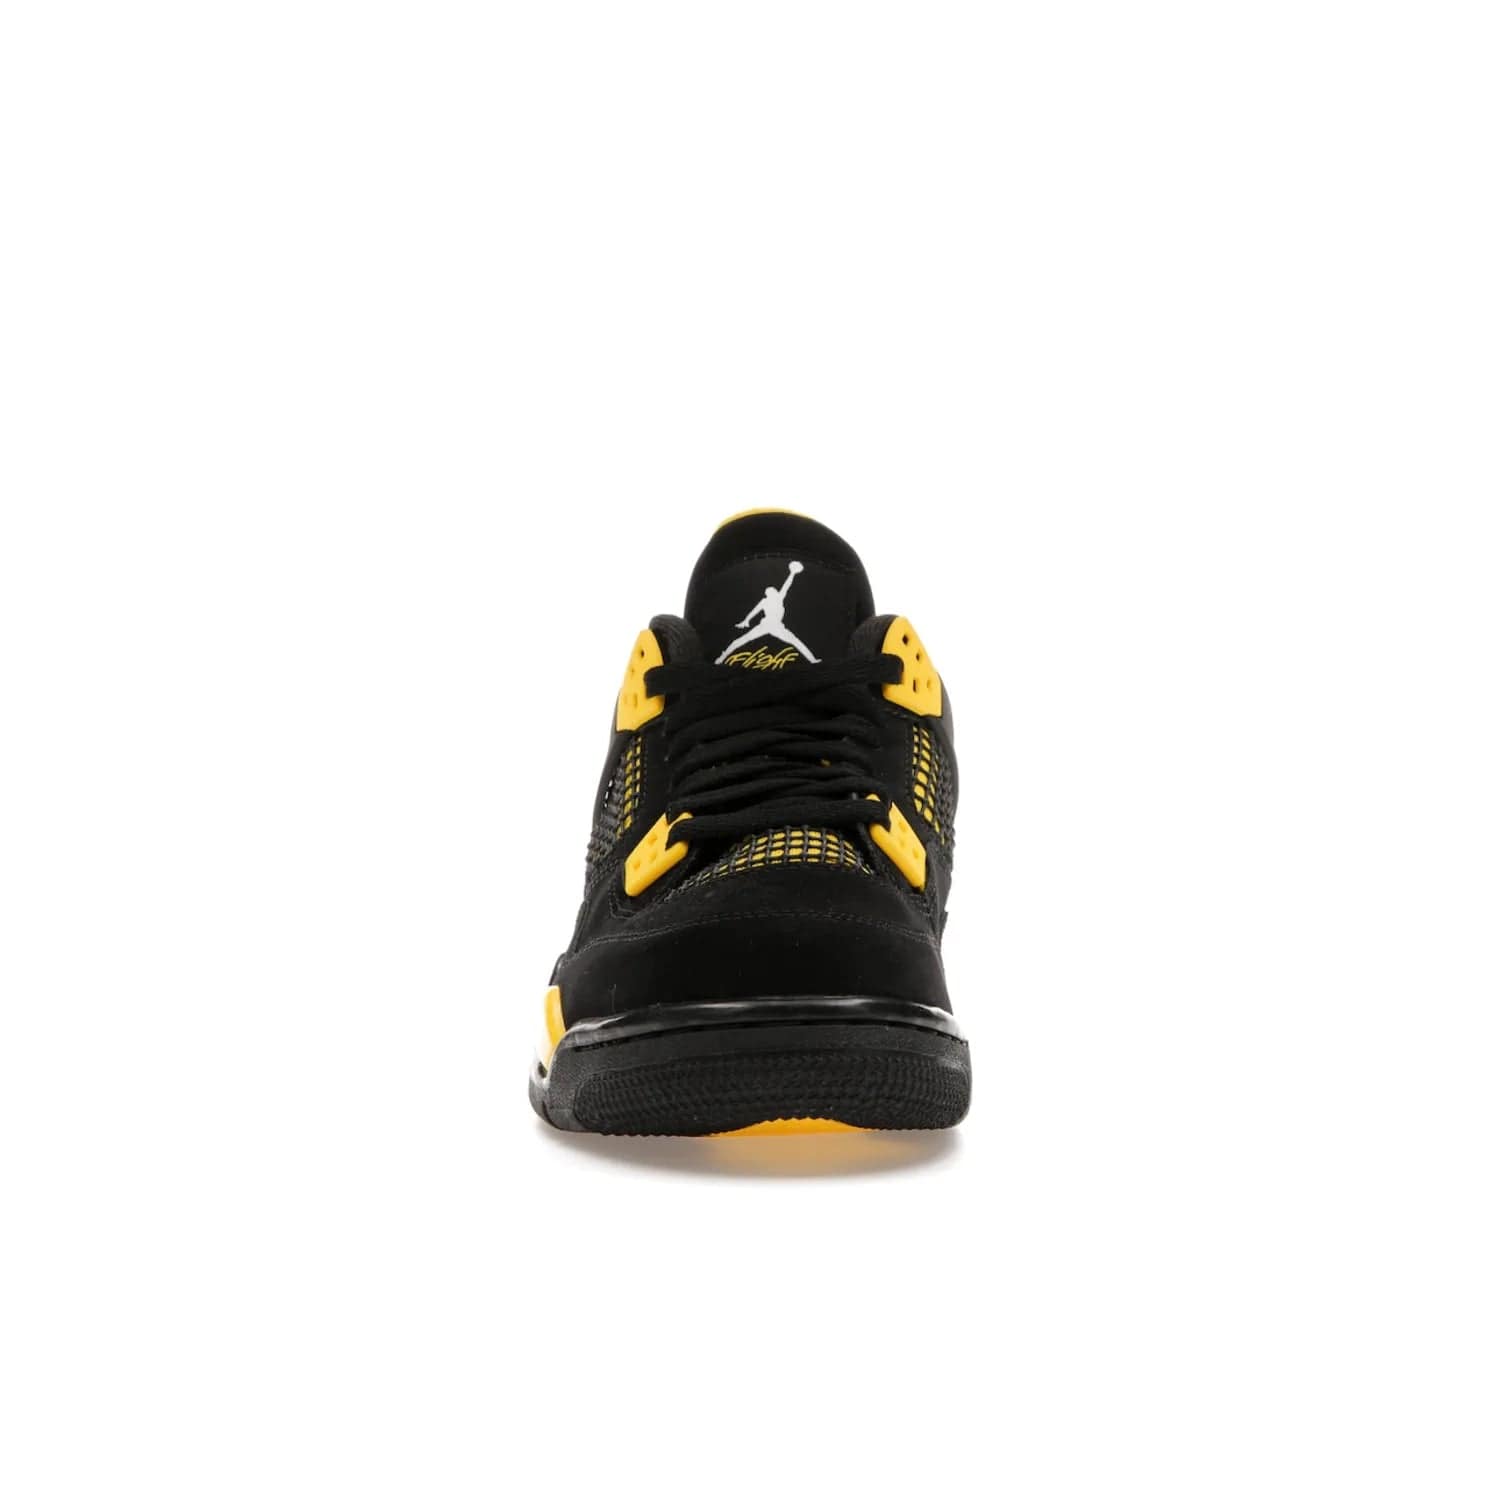 Jordan 4 Retro Thunder (2023) (GS) - Image 10 - Only at www.BallersClubKickz.com - Introducing the iconic Jordan 4 Retro Thunder from the 2023 collection! Sleek black and Tour Yellow detailing. Signature Jordan tongue tab. Mesmerizing design for sneaker collectors. Get yours now!